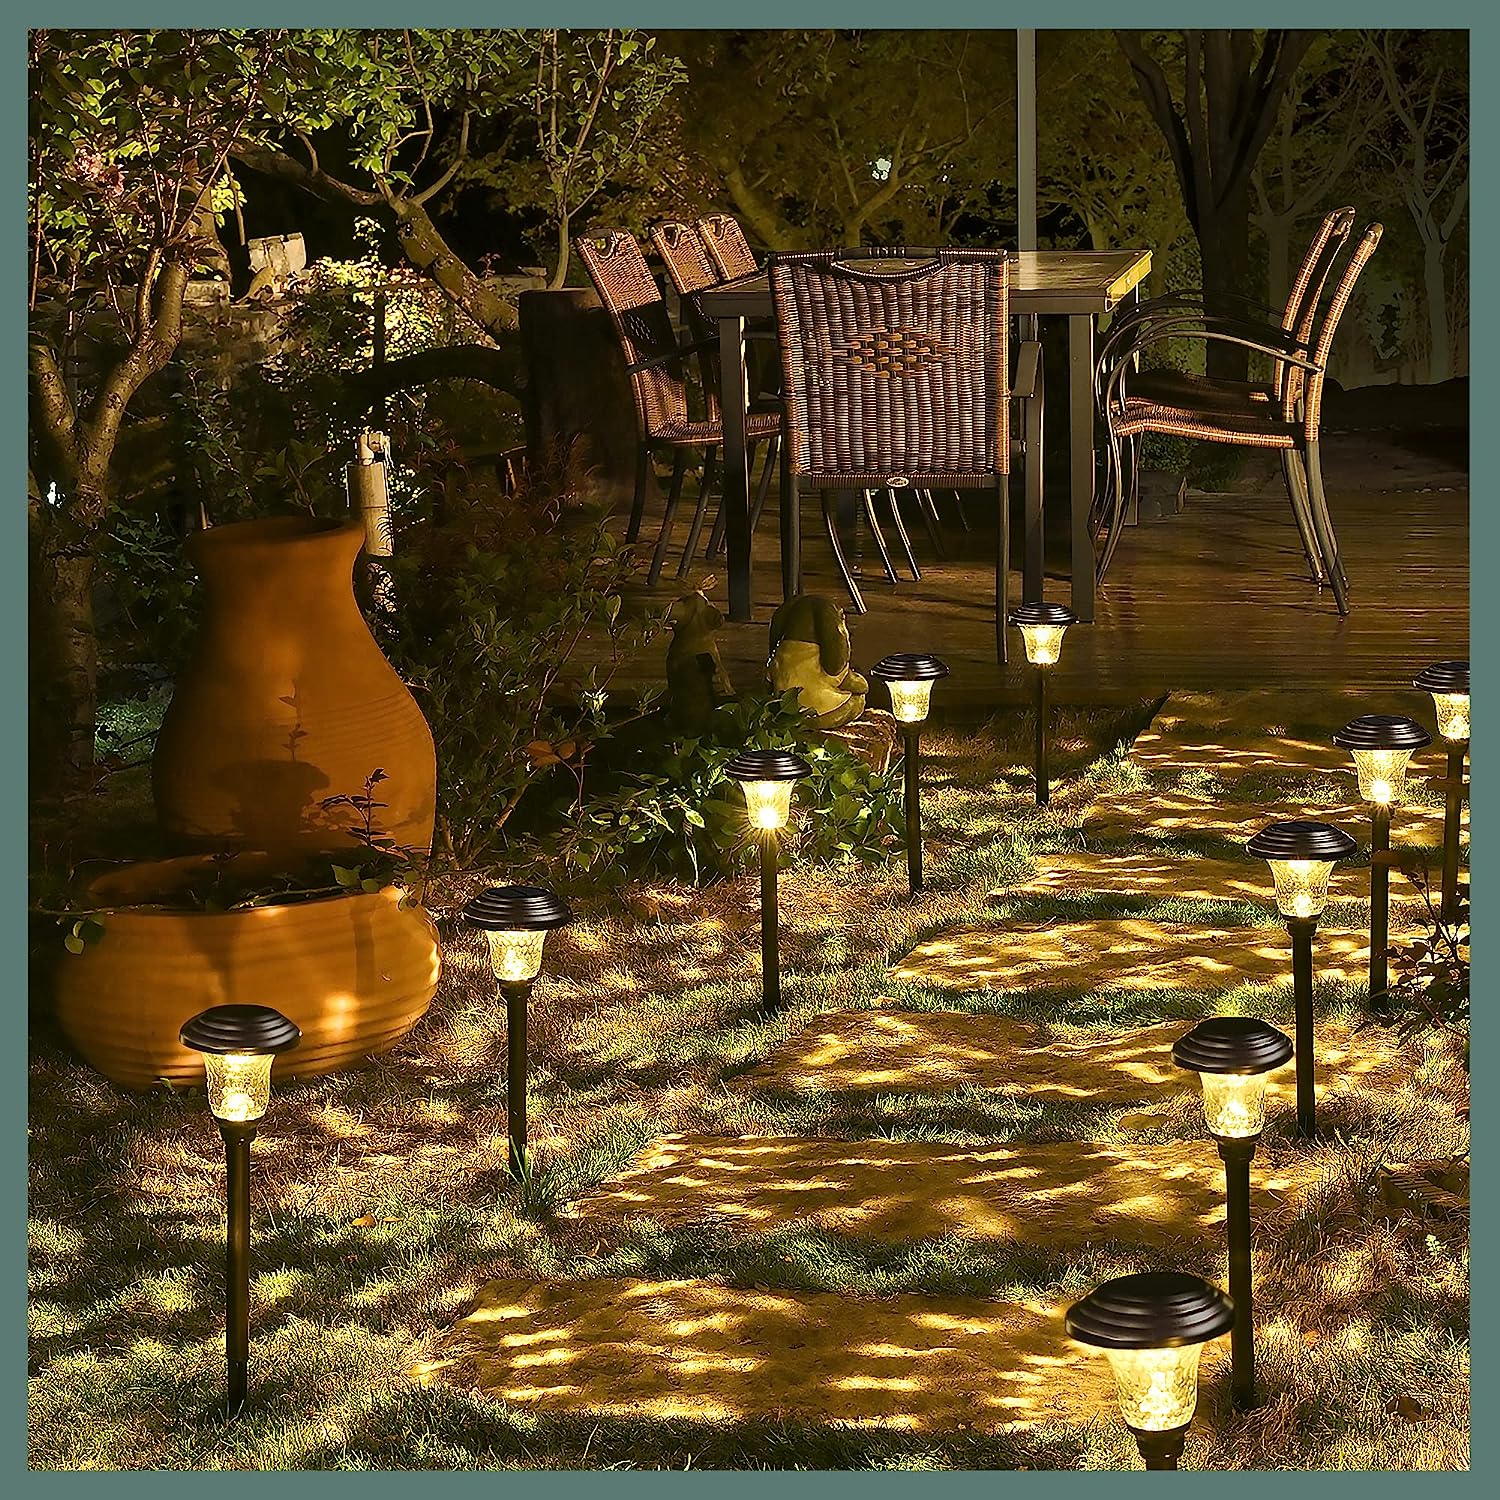 backyard patio with stone pathway lit by small lights leading to table and chairs